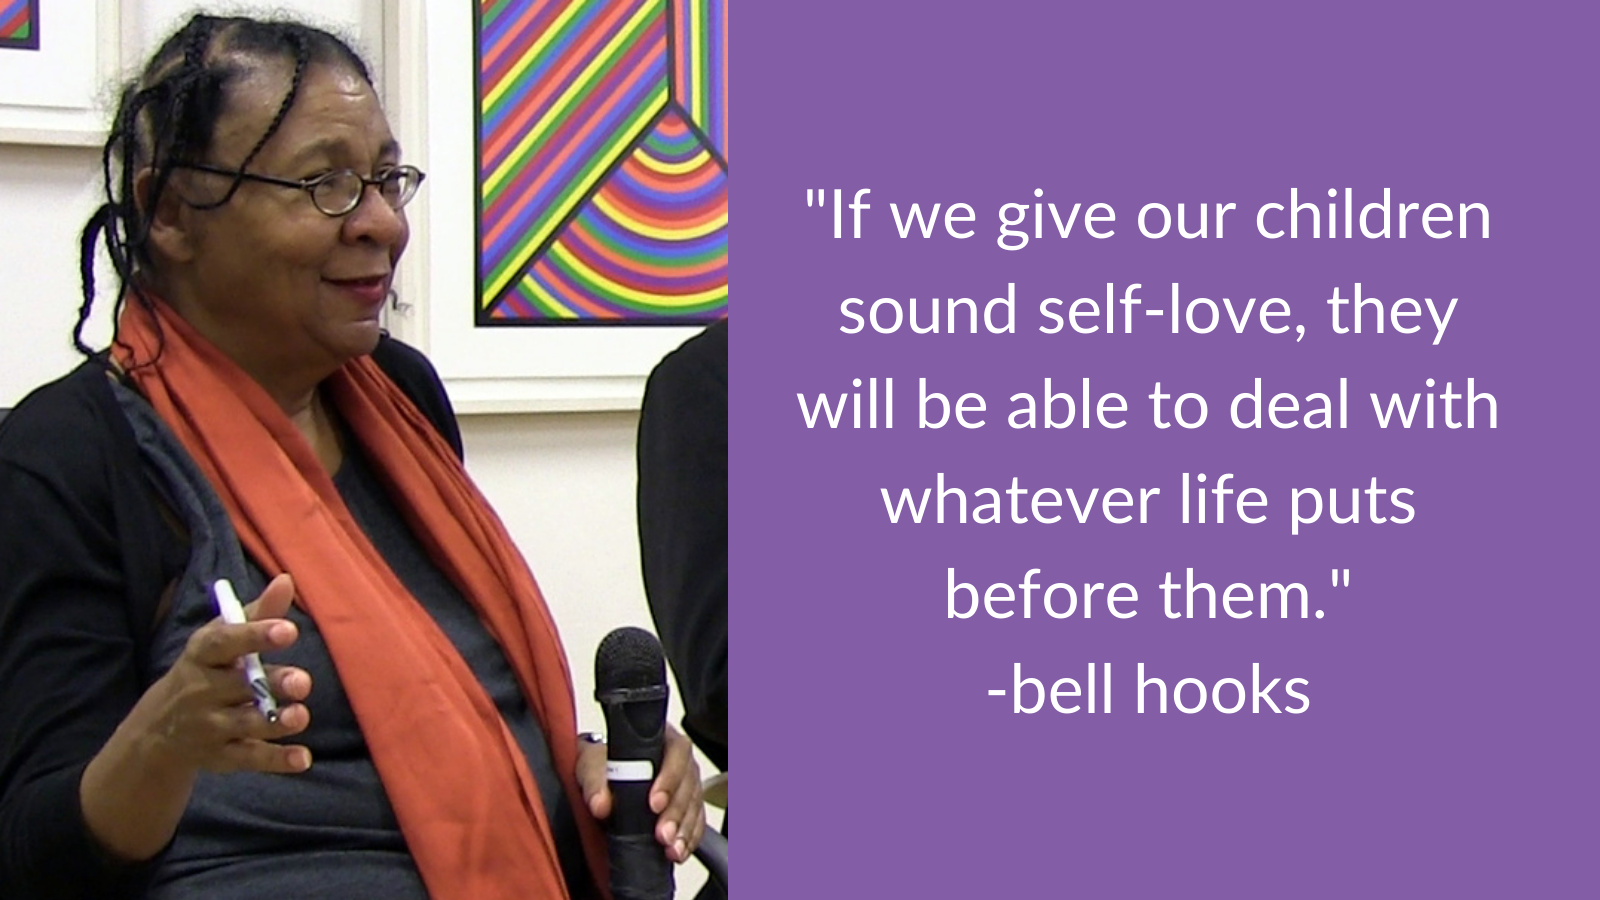 "If we give our children sound self-love, they will be able to deal with whatever life puts before them." -bell hooks